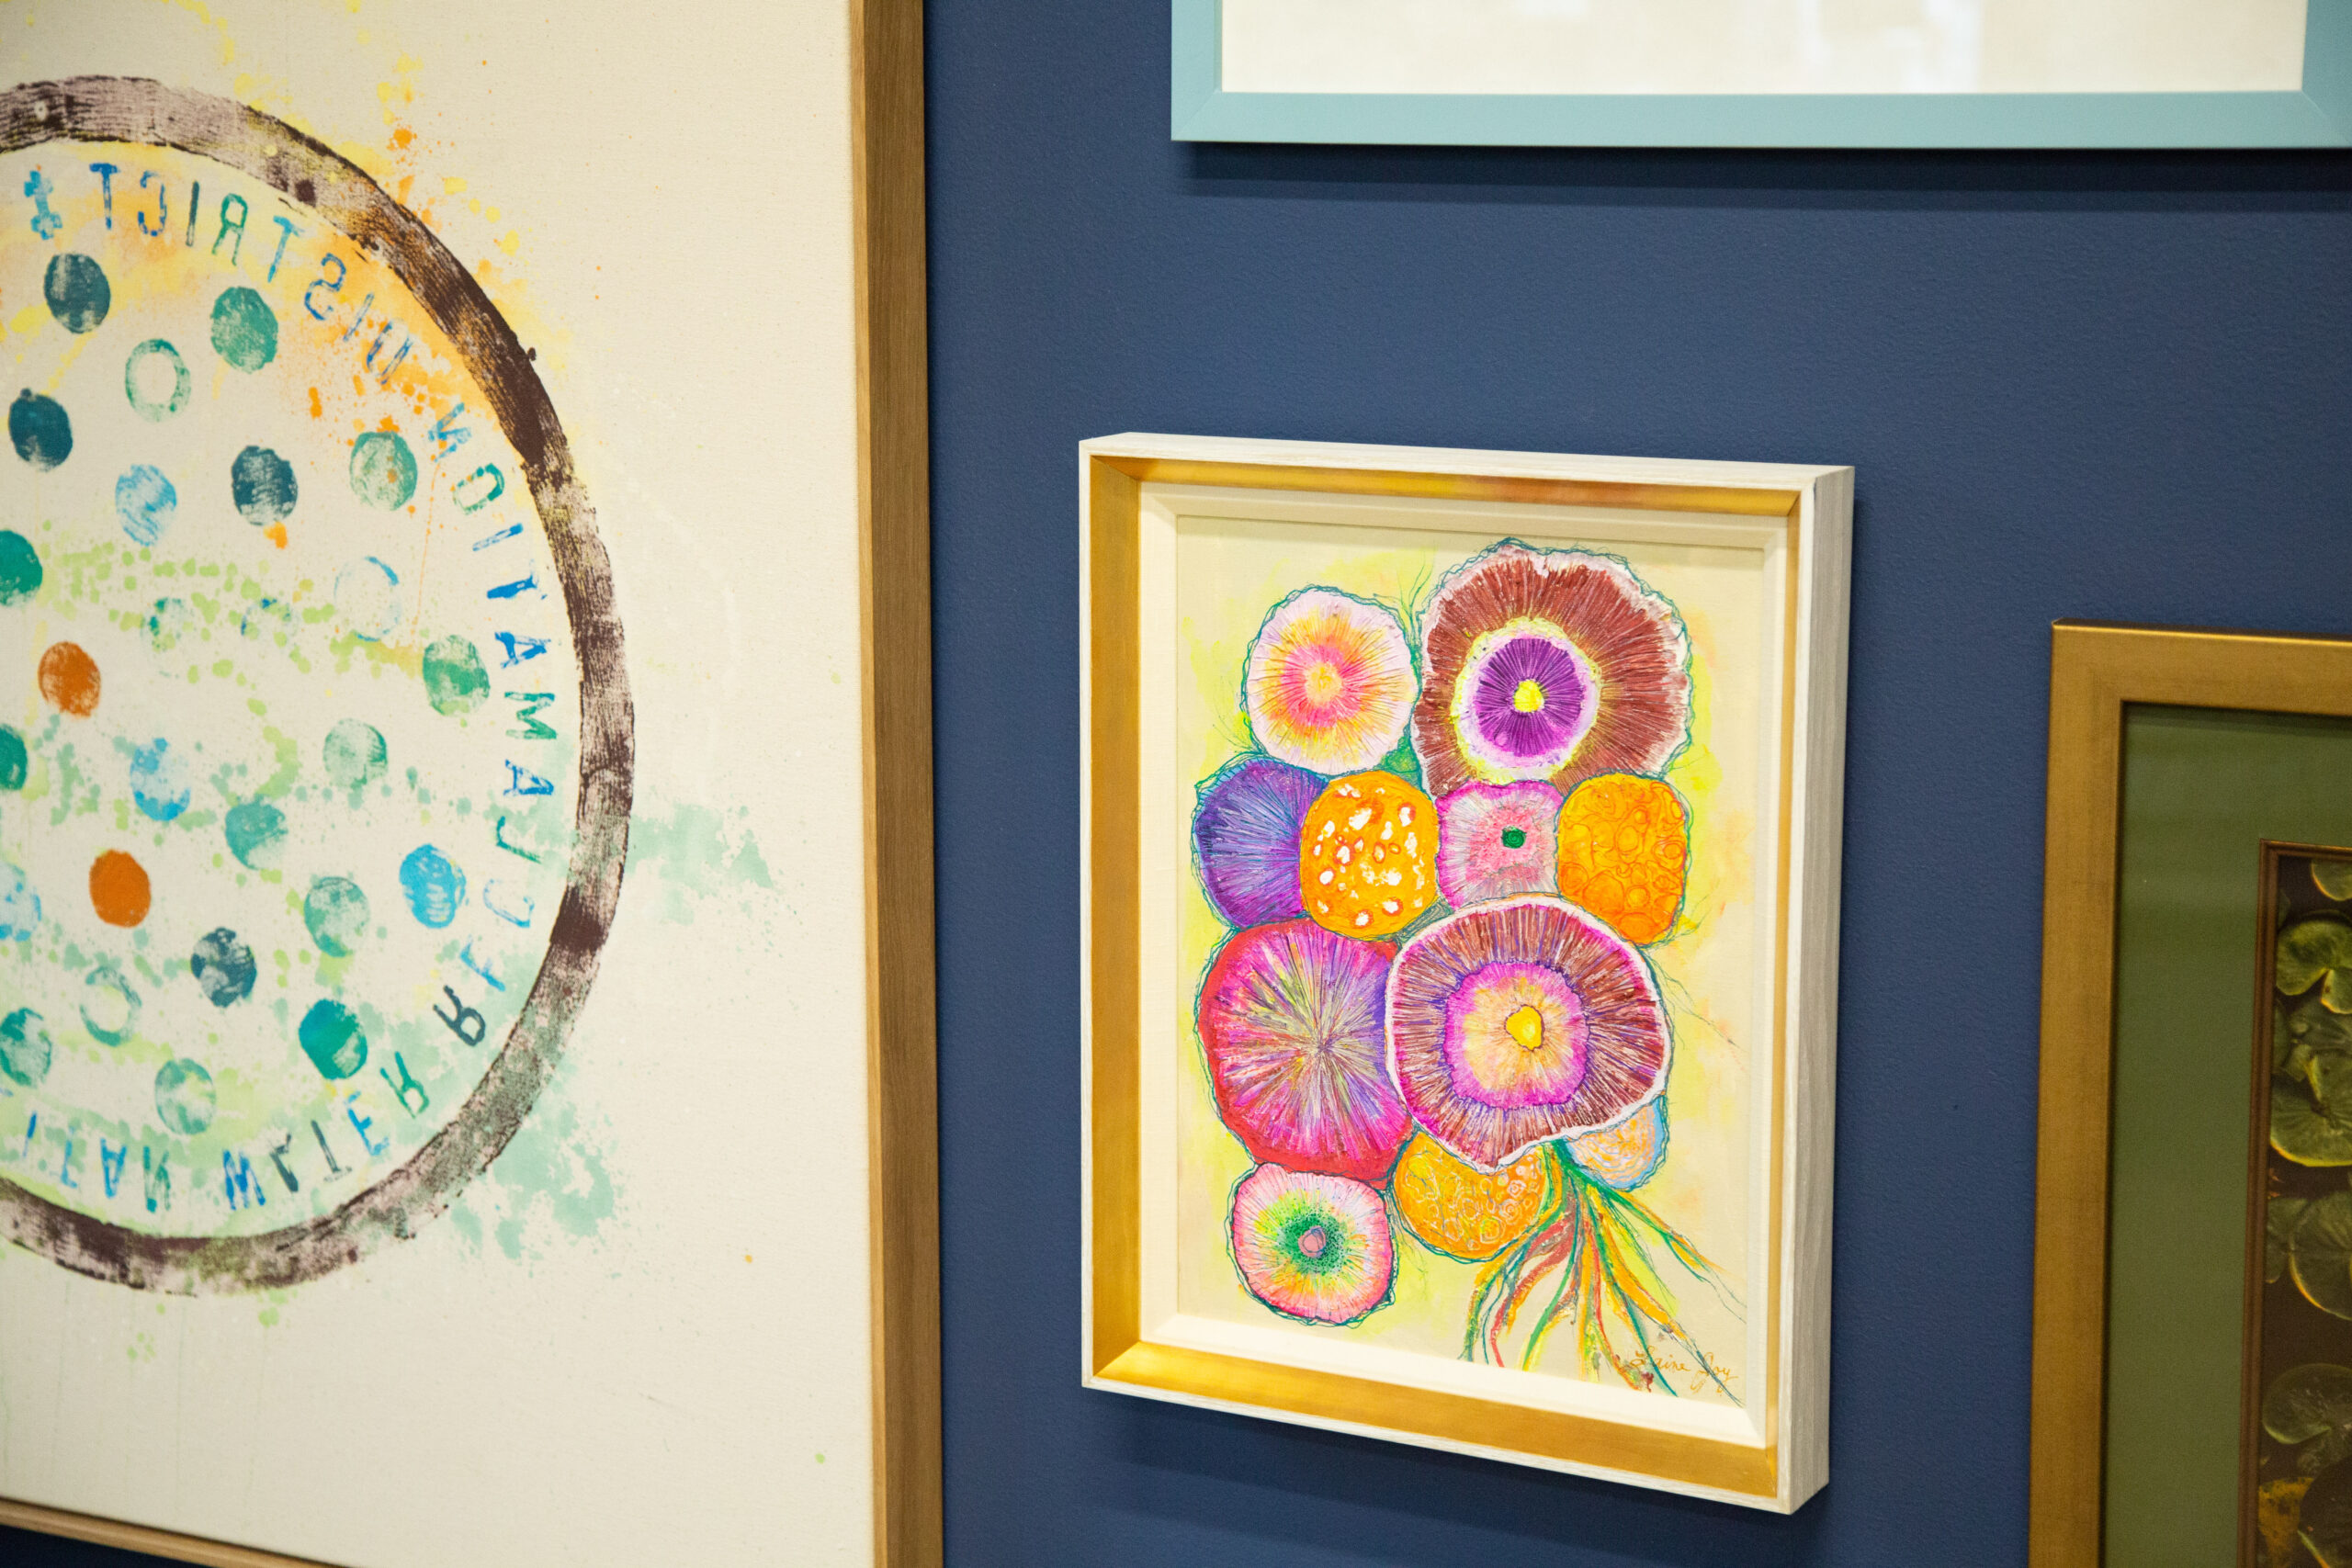 Peterson Picture framing example - a zoomed-in image of an art wall with two beautiful art pieces hung on the wall. One shows a drawn bouquet of colorful flowers and a second art piece.